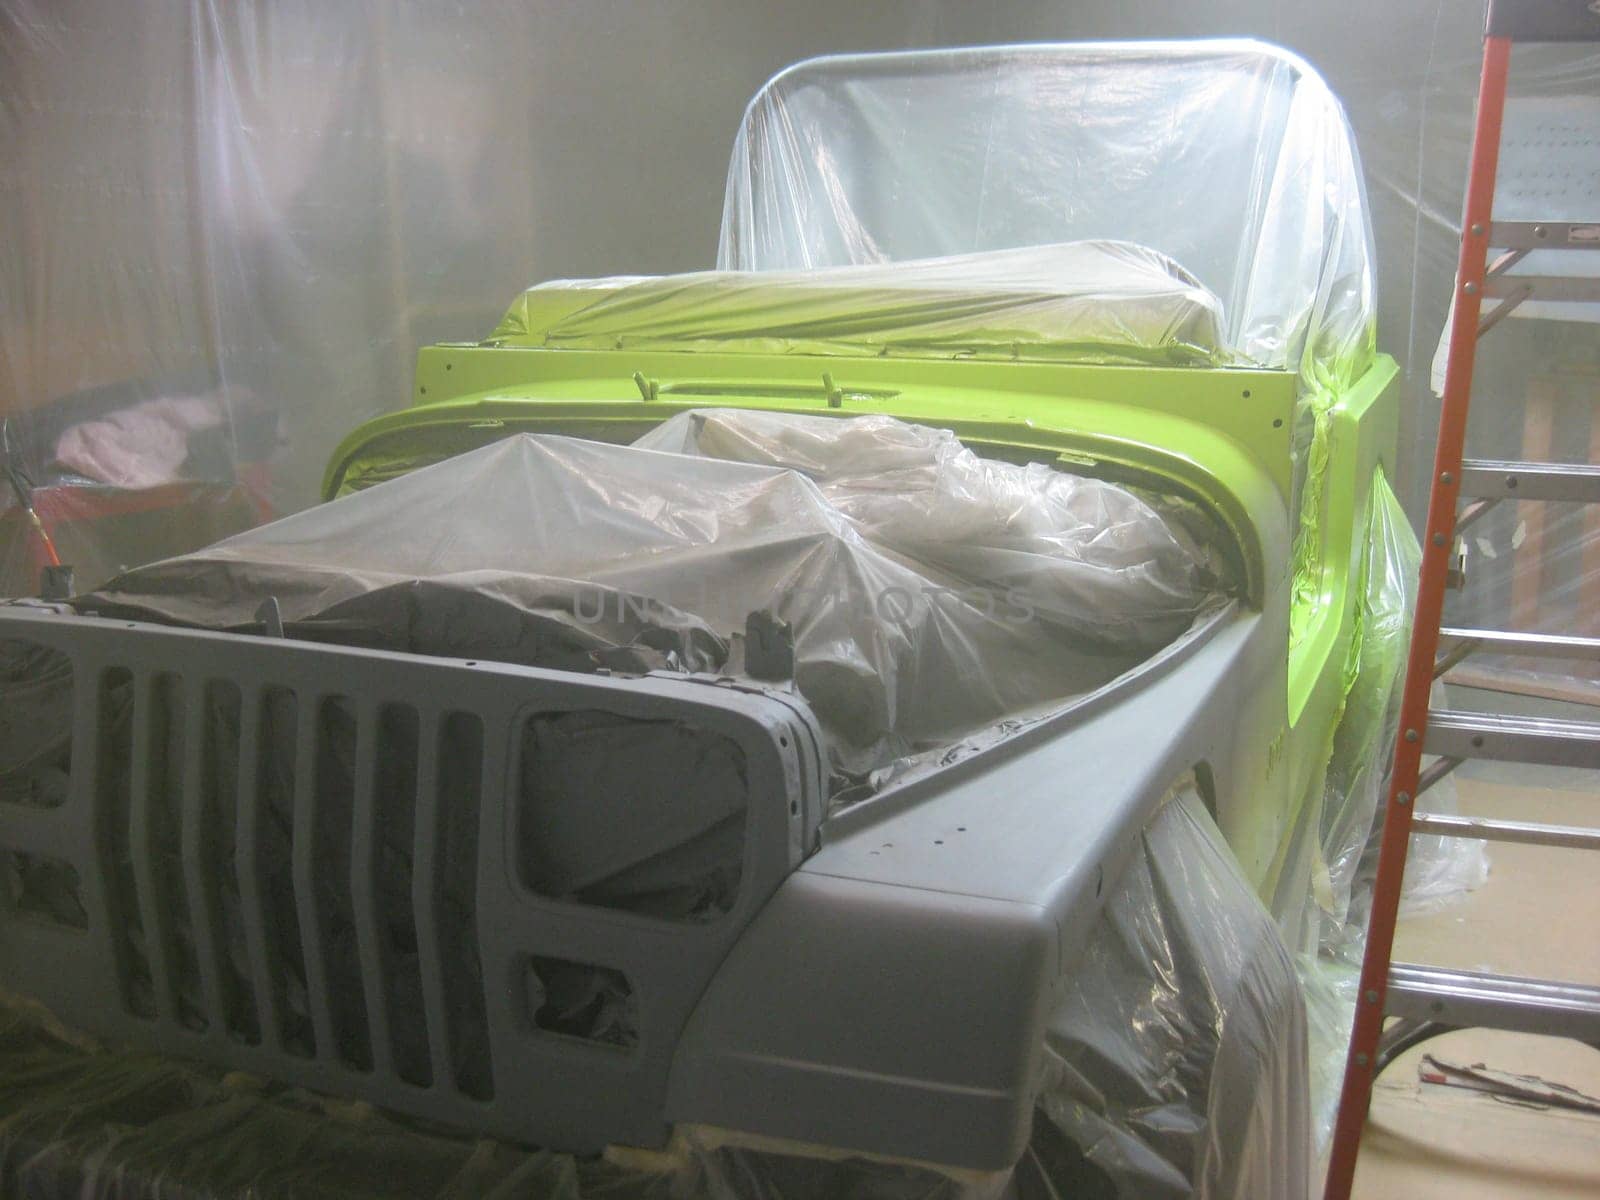 Auto Body Restoration, DIY Lime Green Paint Job, 1990s Vehicle by grumblytumbleweed